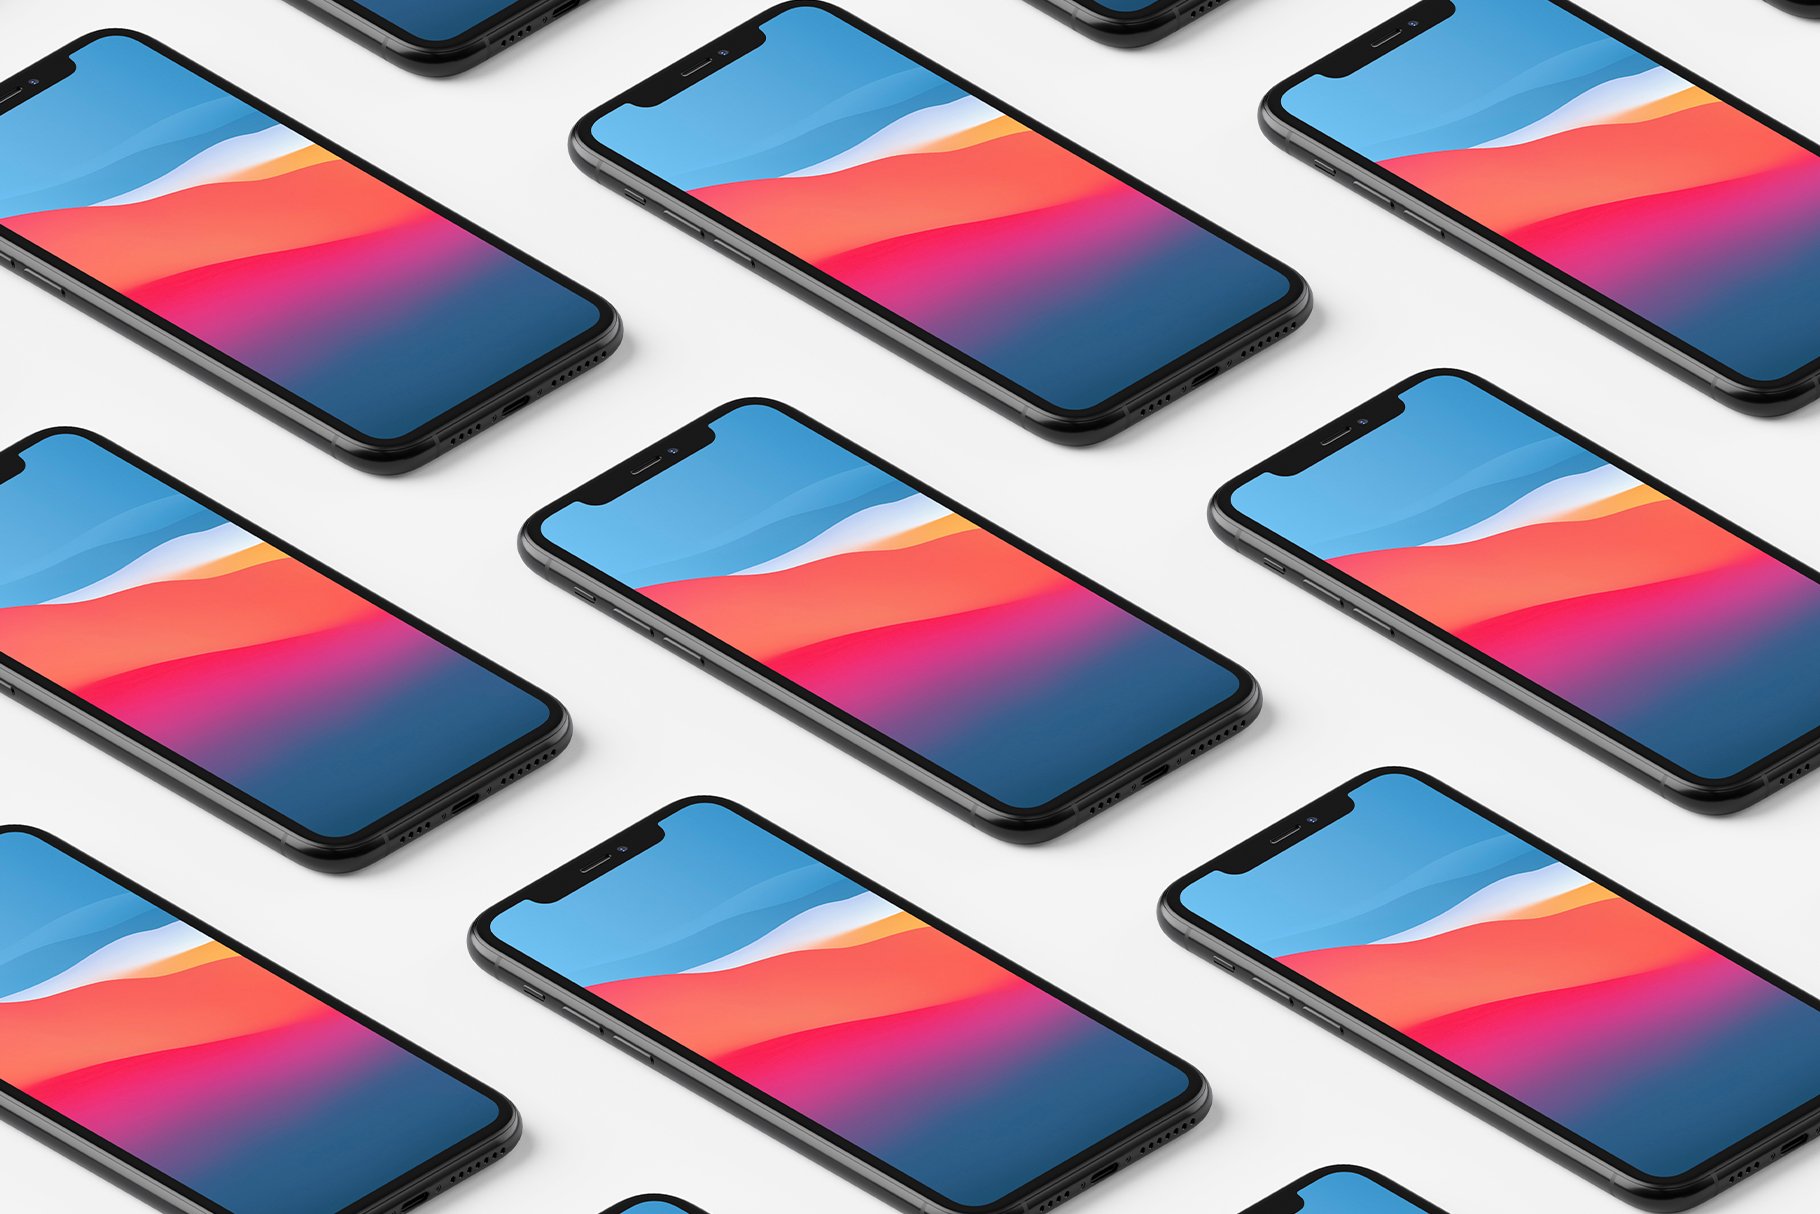 iphone 11 pro mockup pack by anthony boyd graphics 28s929 518